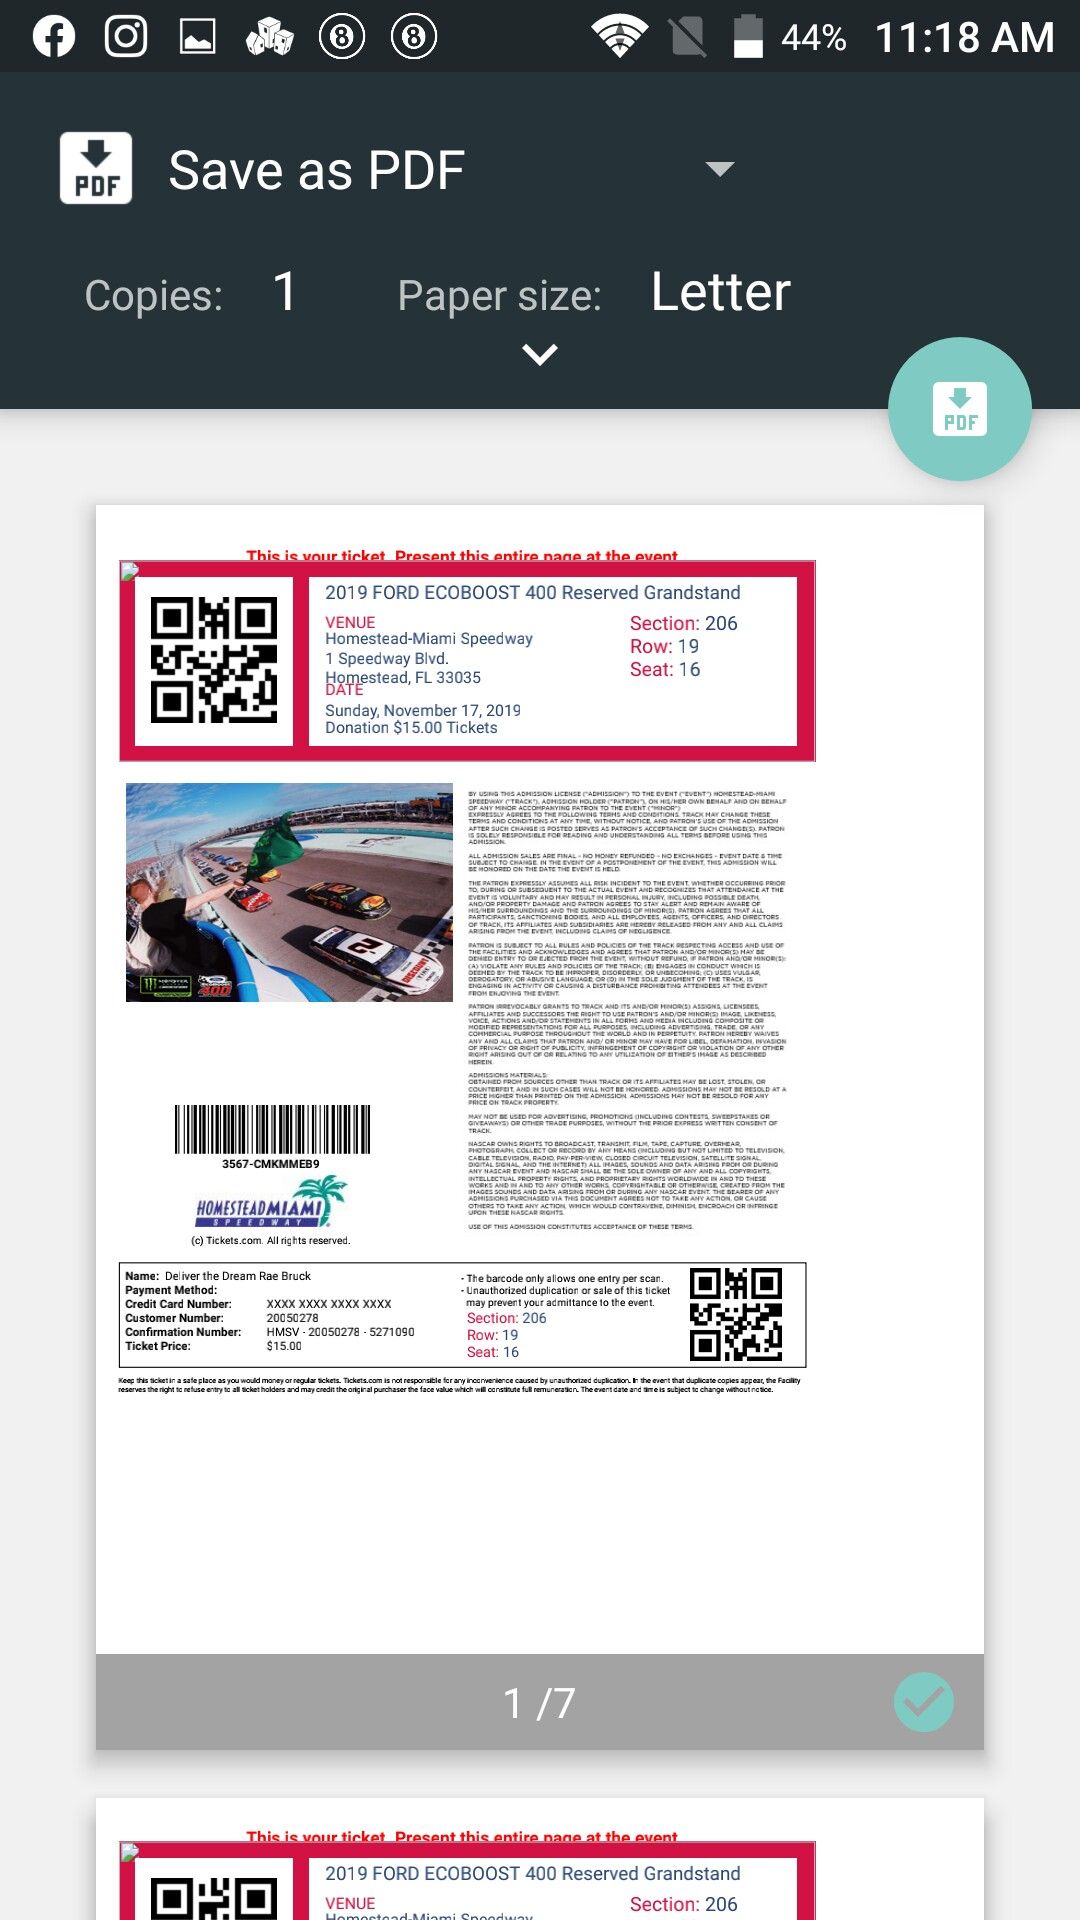 7 Nascar tickets for sale